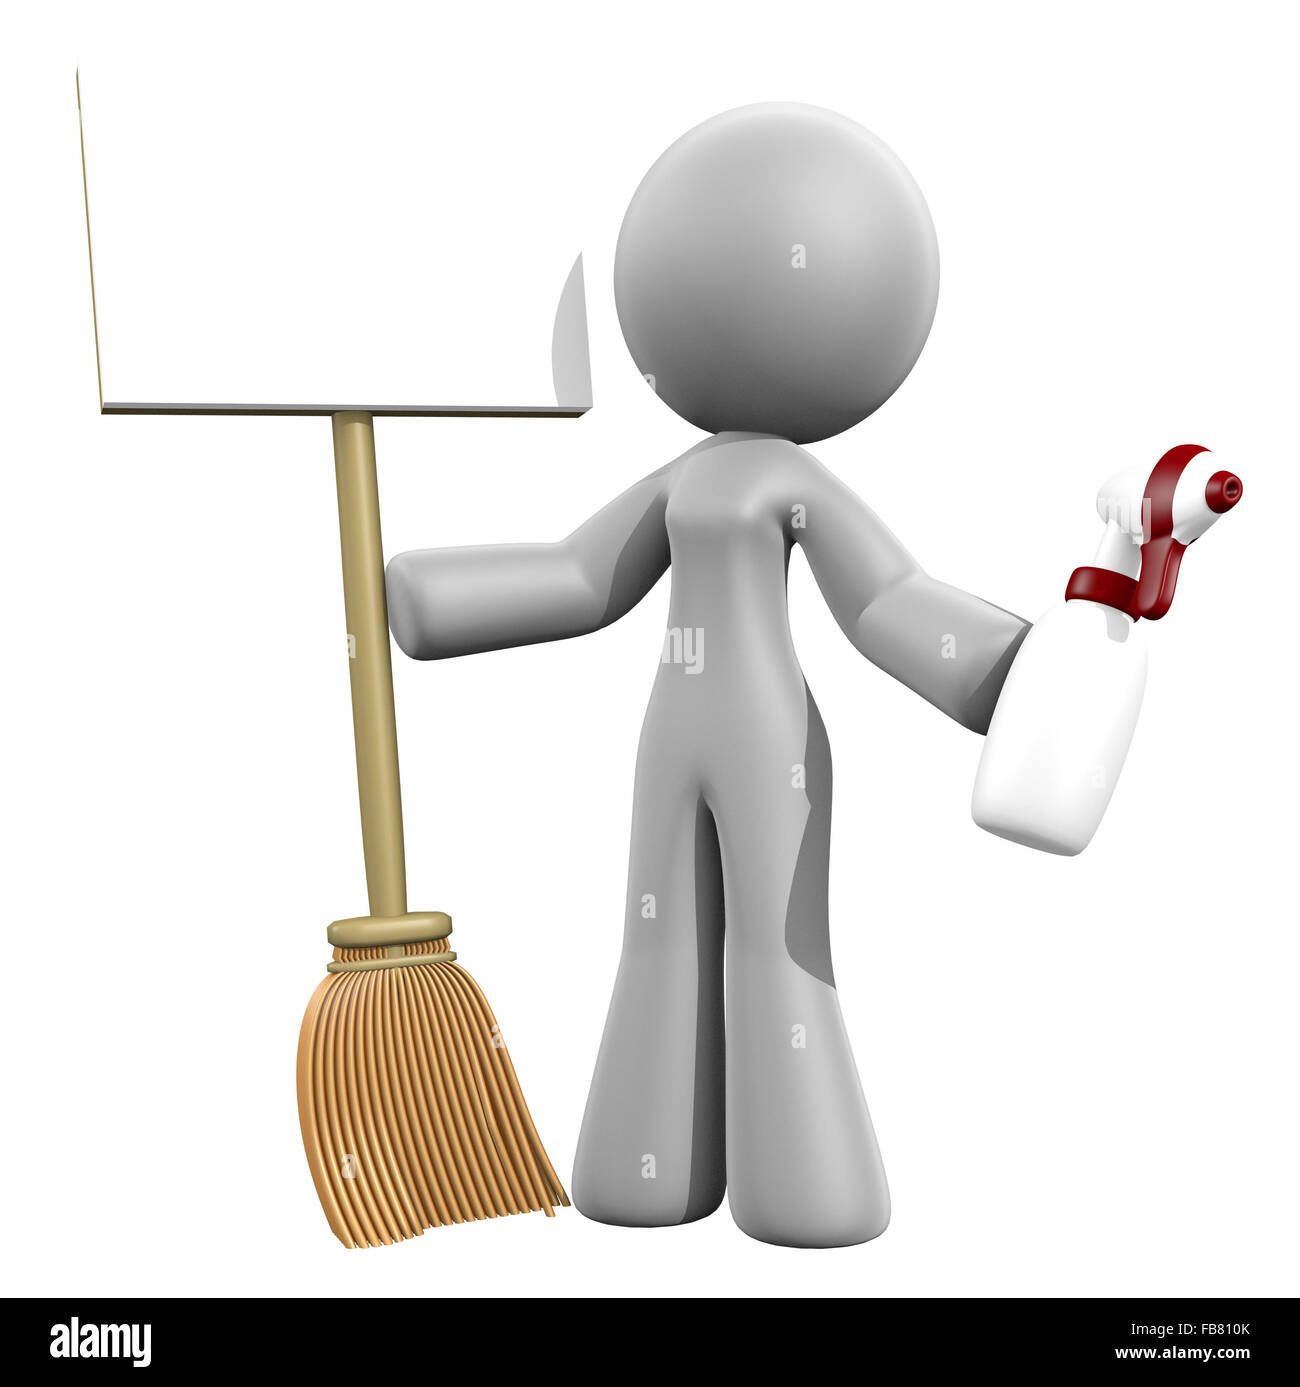 3d lady holding sign that doubles as a broom - a classy concept to advertise cleaning services. Stock Photo